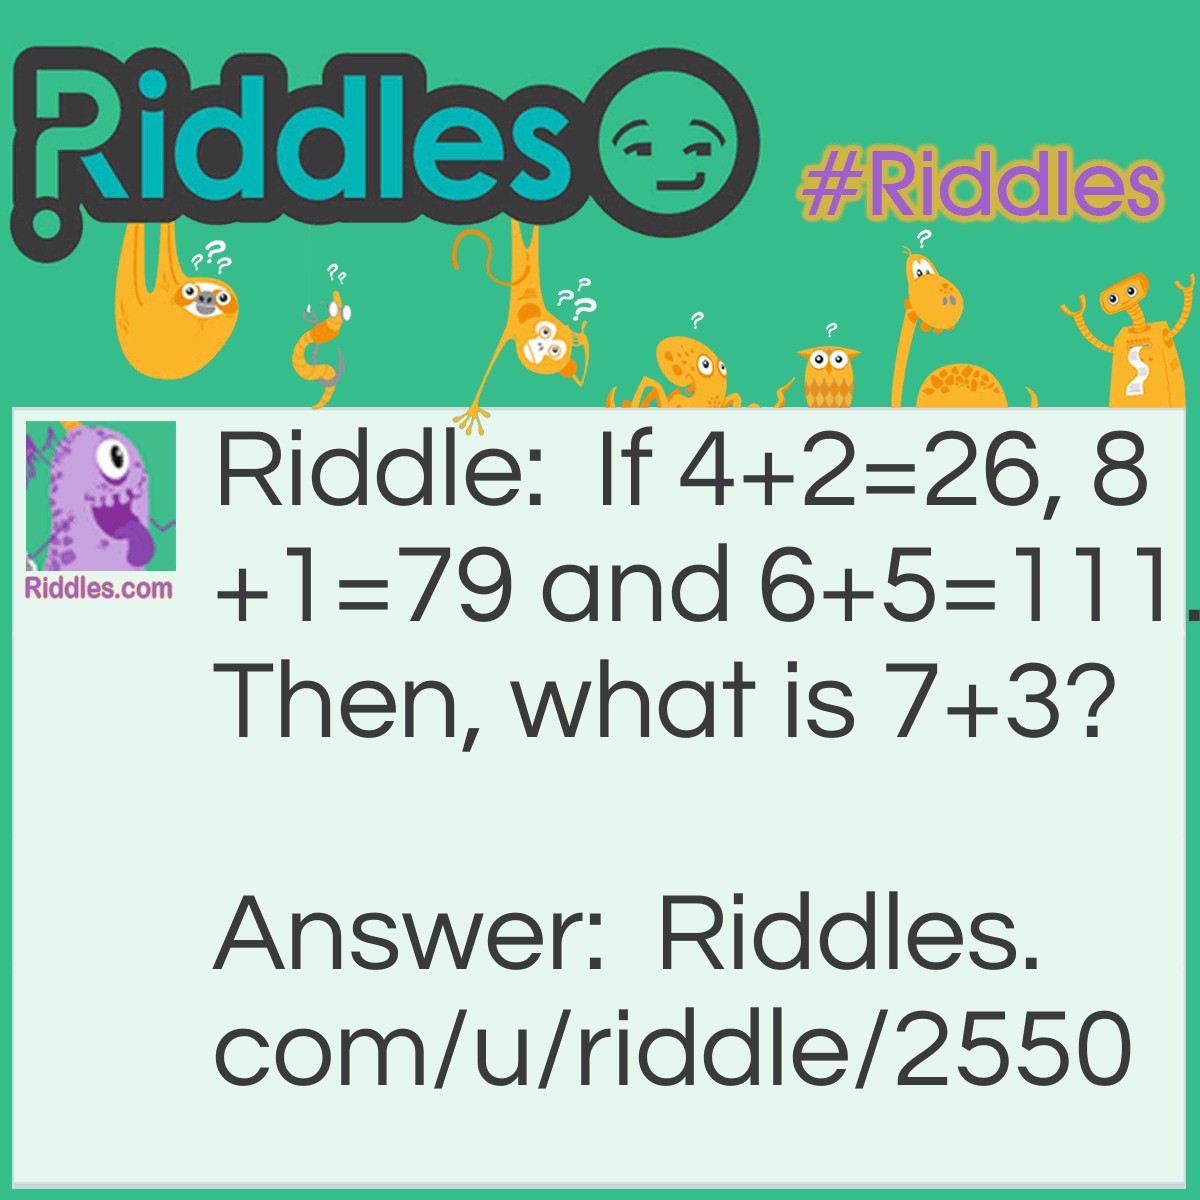 Riddle: If 4+2=26, 8+1=79 and 6+5=111. Then, what is 7+3? Answer: 410.4+2=26 is because 4-2=2 and 4+2=6,so it is 26. Therefore, 7-3=4 and 7+3=10(410).